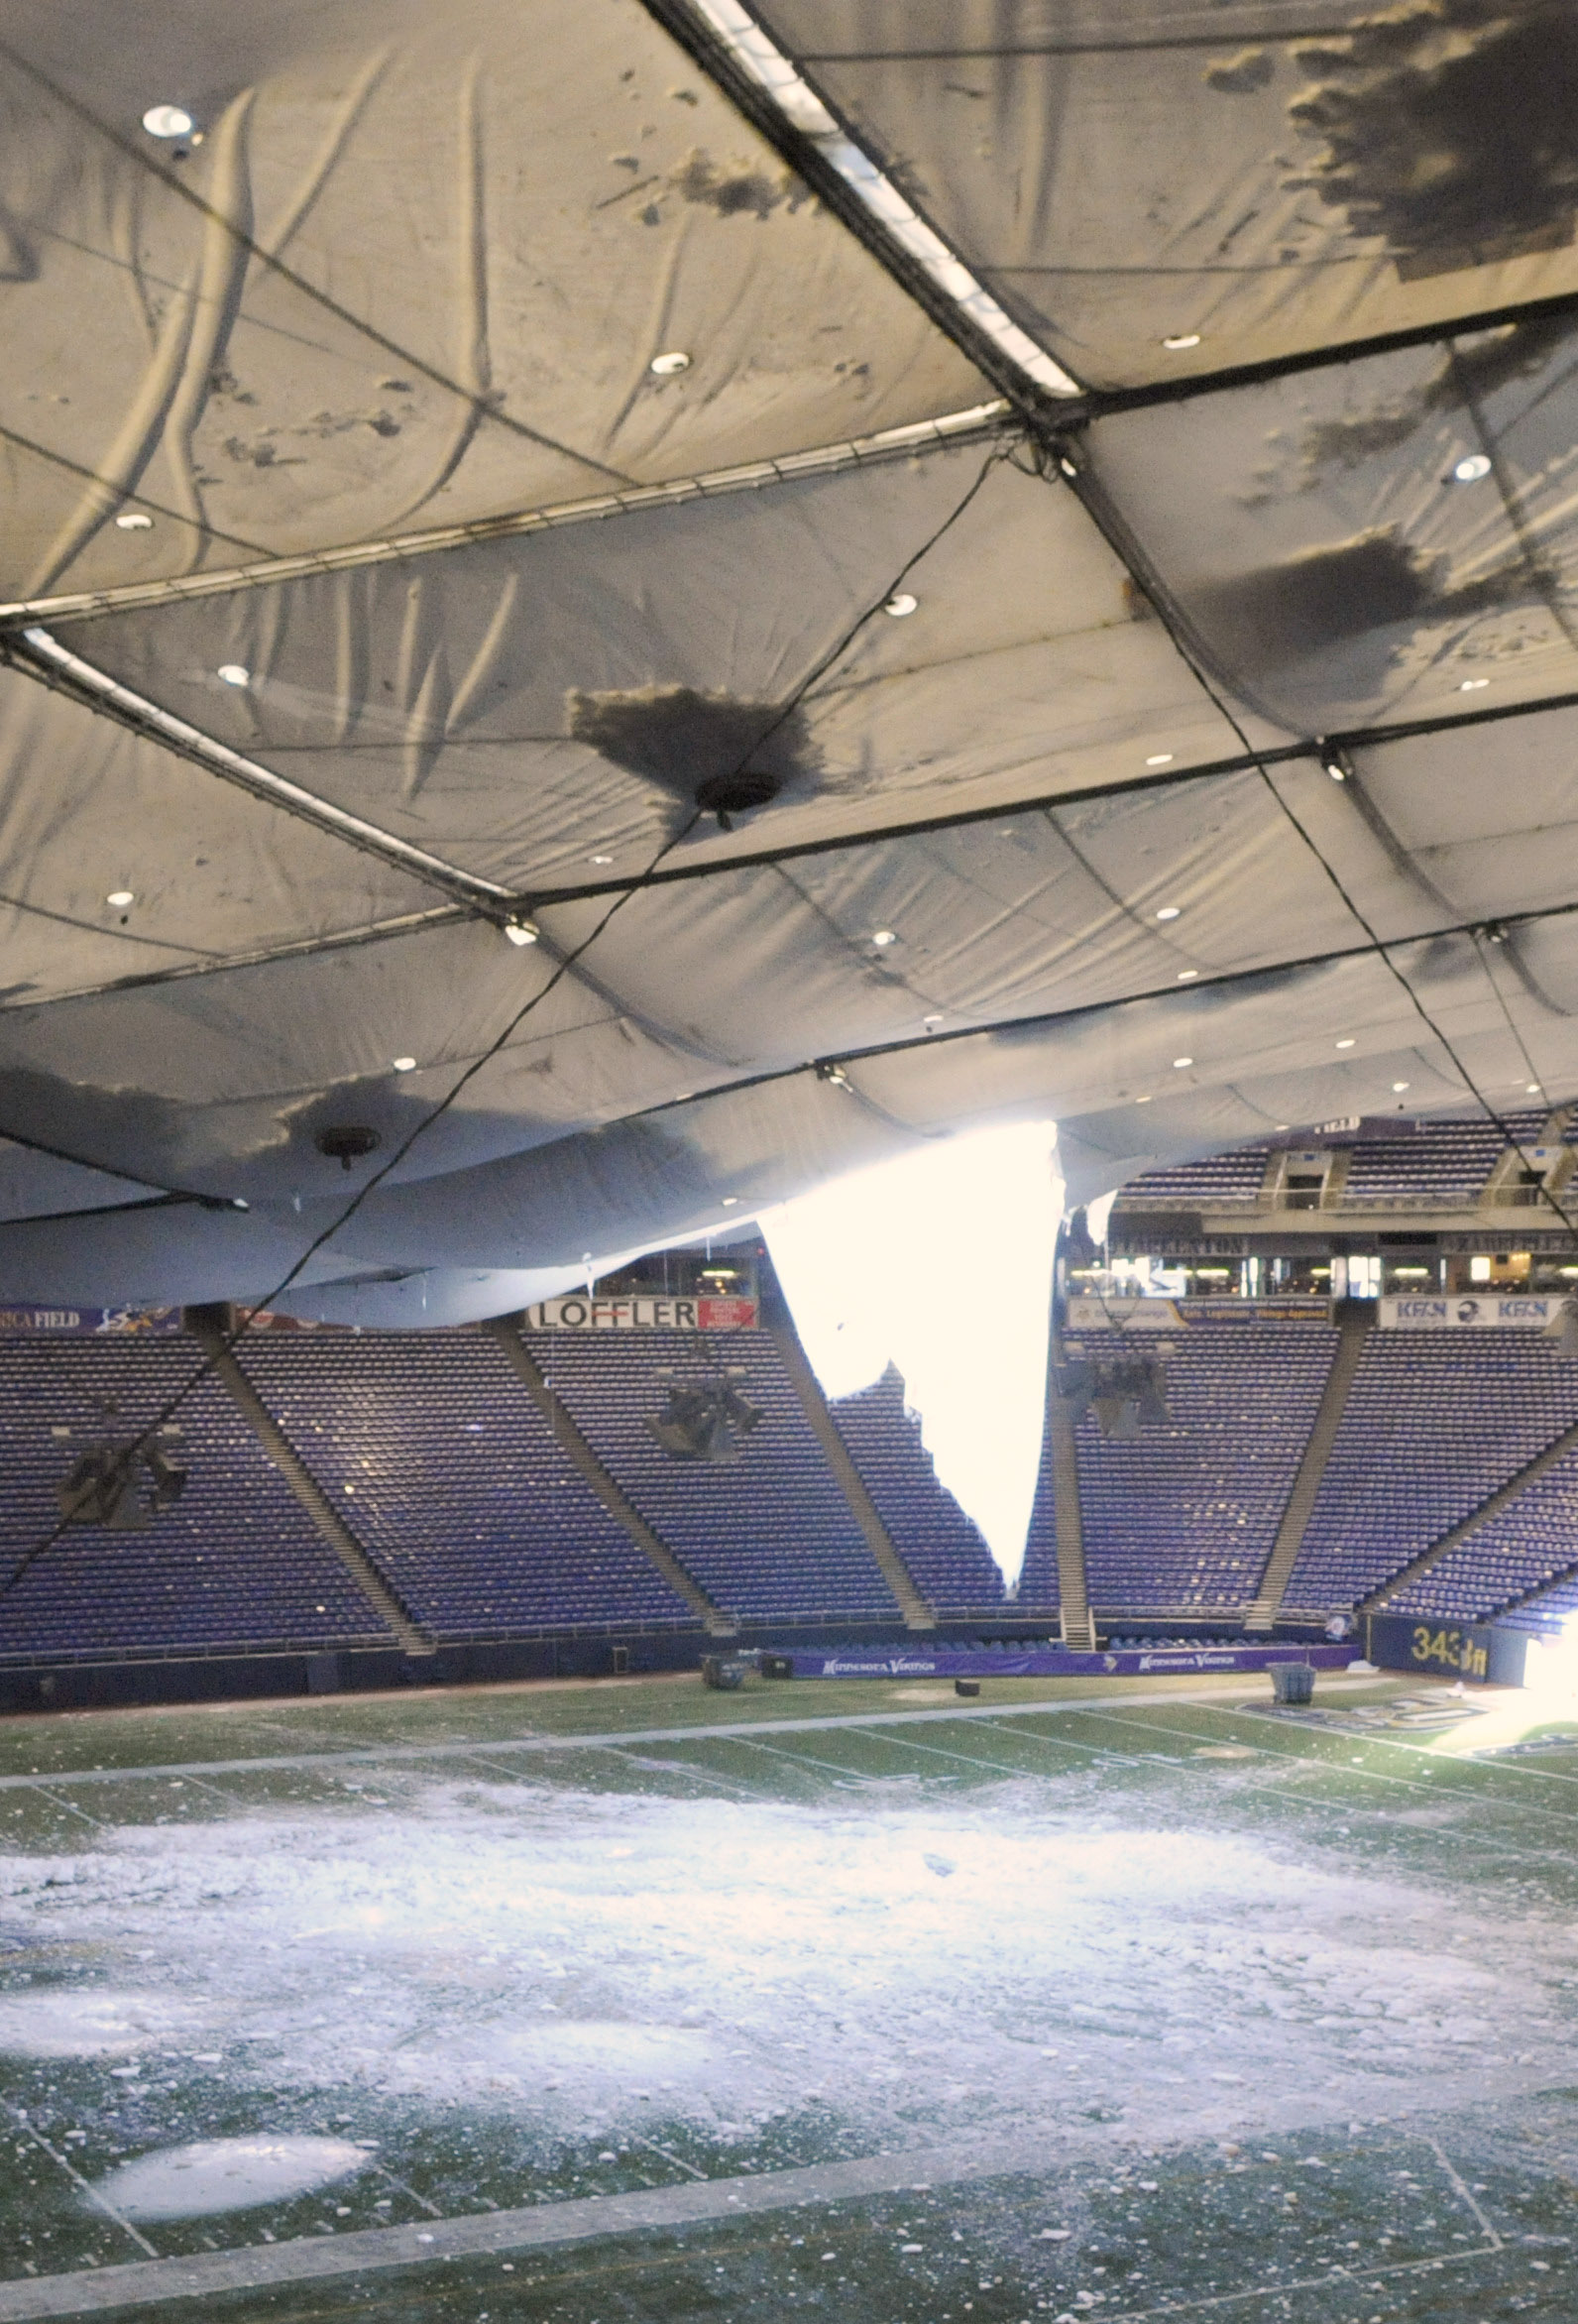 MINNEAPOLIS, MN - DECEMBER 13: A torn section of the roof sags inside the Hubert H. Humphrey Metrodome on December 13, 2010 in Minneapolis, Minnesota. The Metrodome's roof collapsed under the weight of snow after a powerful blizzard hit the area on Decemb